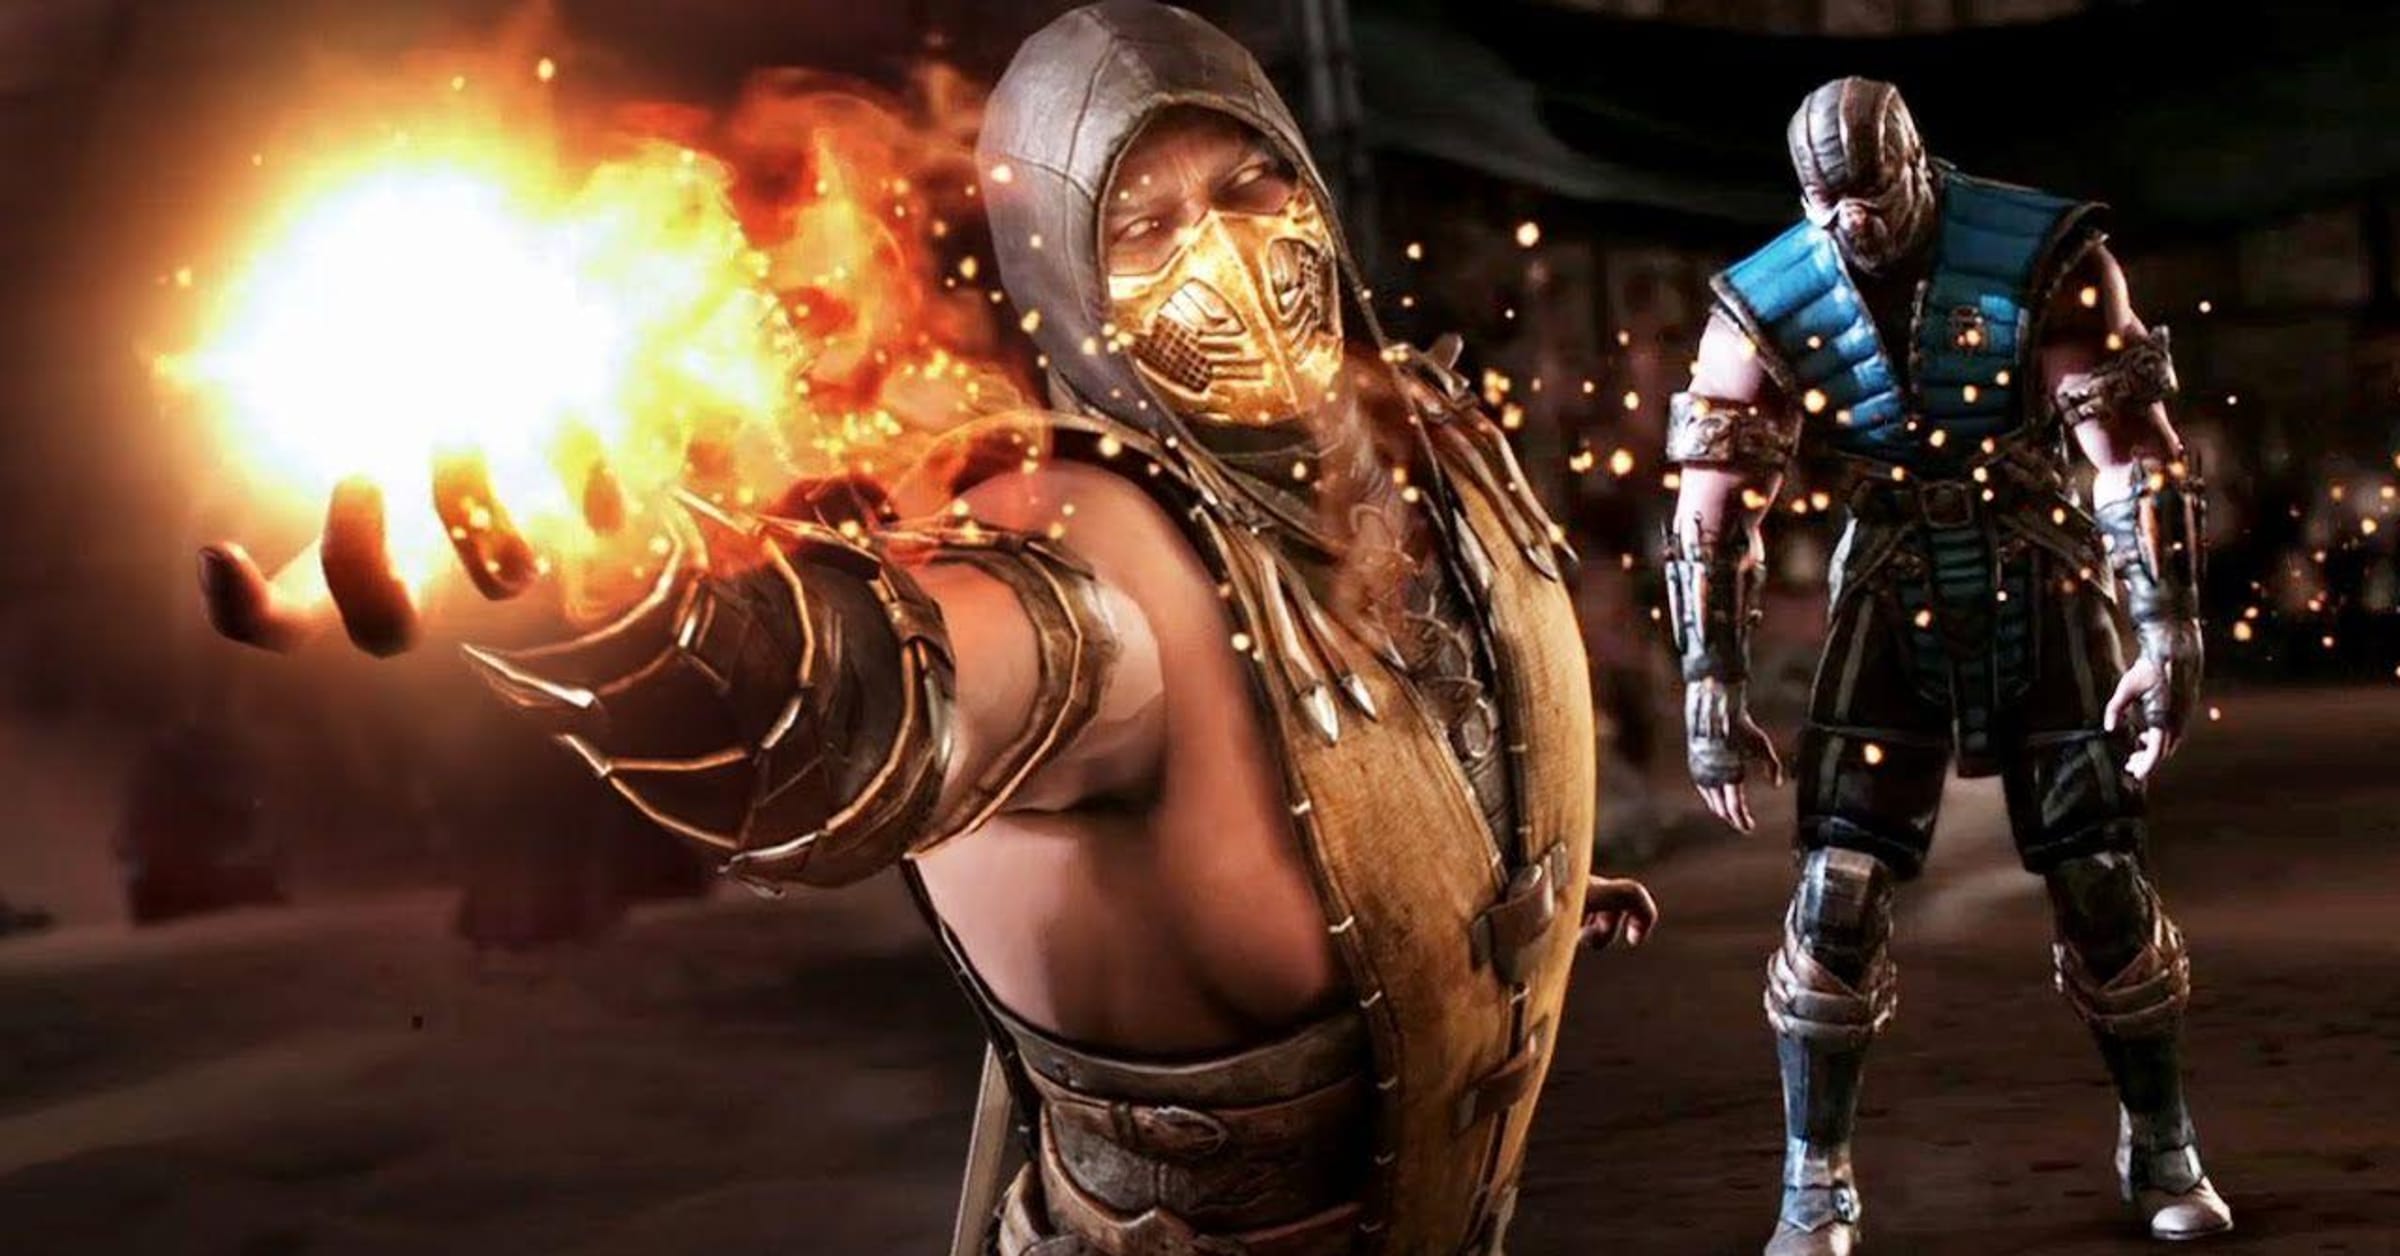 The Best Mortal Kombat Games, Ranked from Best to Worst